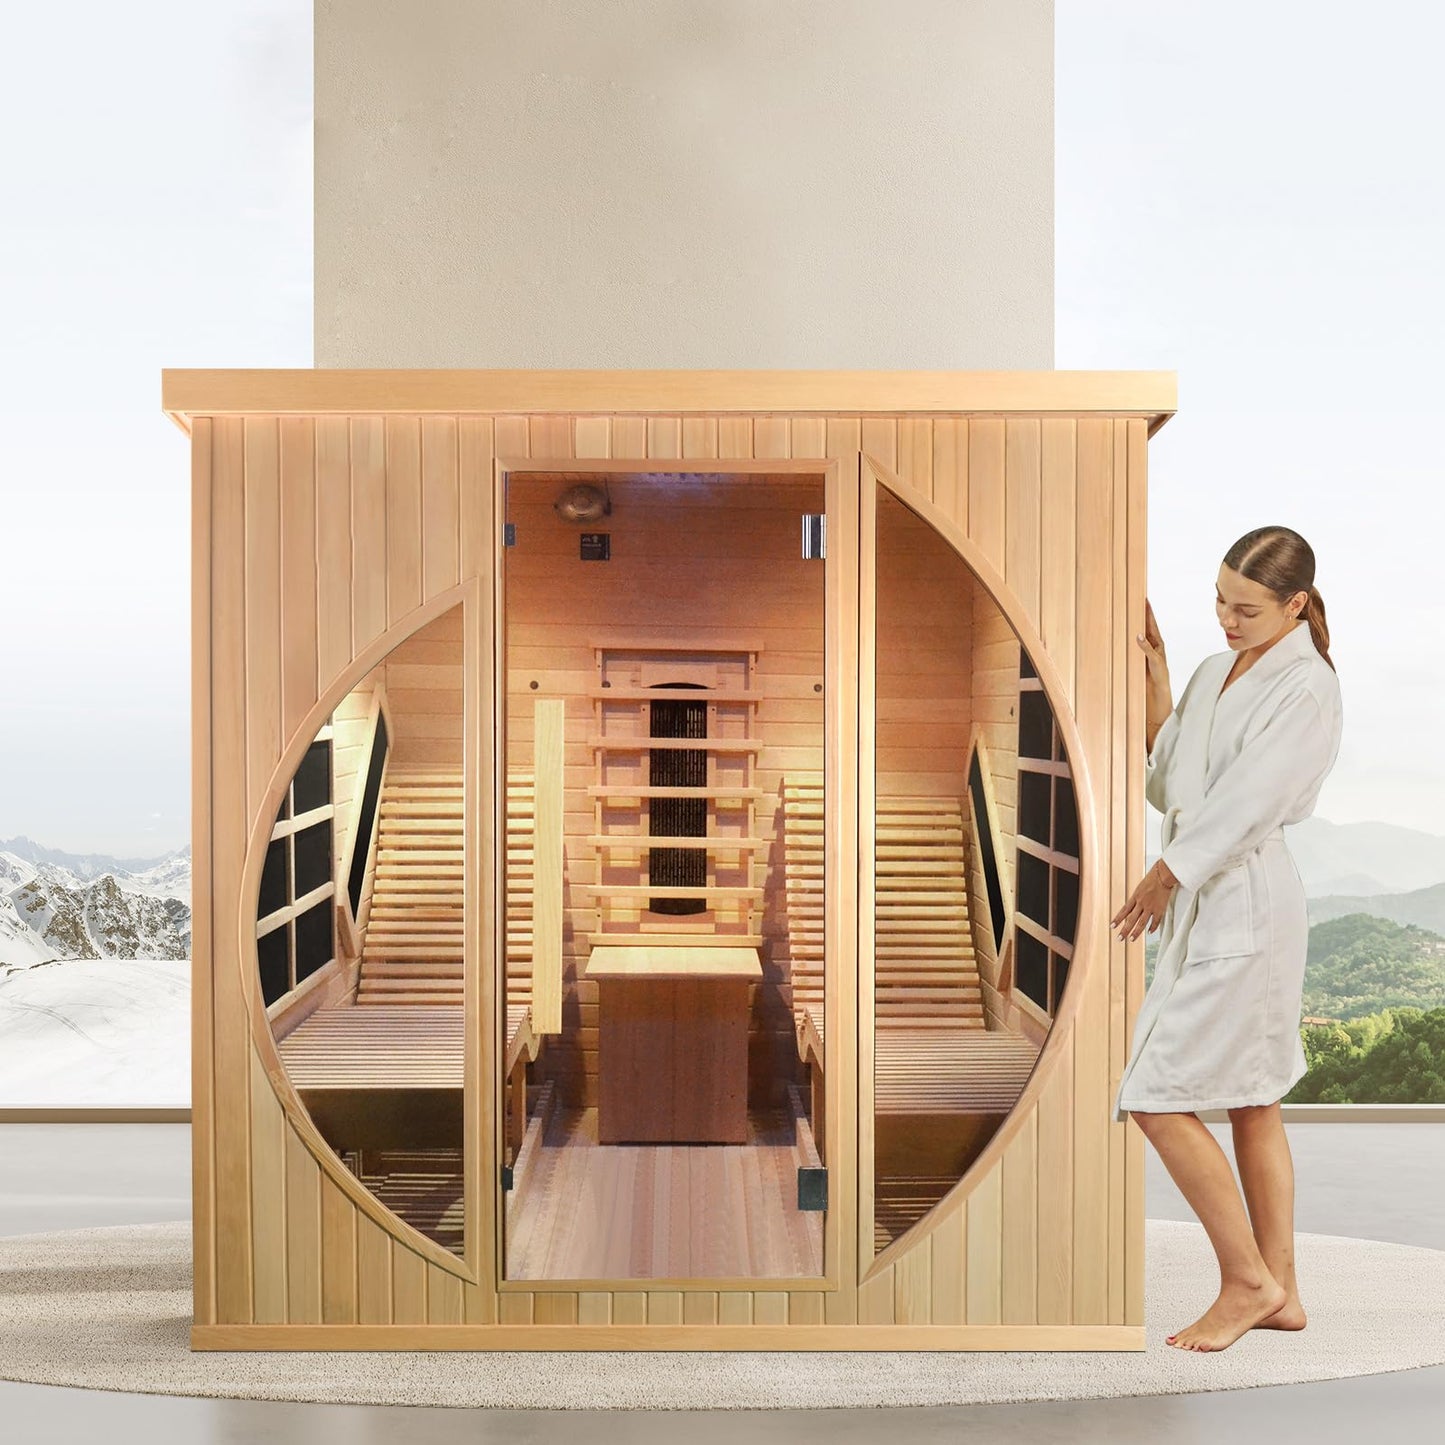 TaTalife Infrared 2 Person Wooden Sauna Room, Luxurious Sauna with Recliner, 3400W Dry Heat Sauna for Home, 9 Heating Panels, Bluetooth Speaker, 7Color Lights, Oxygen Bar, 220V(Canadian Hemlock)